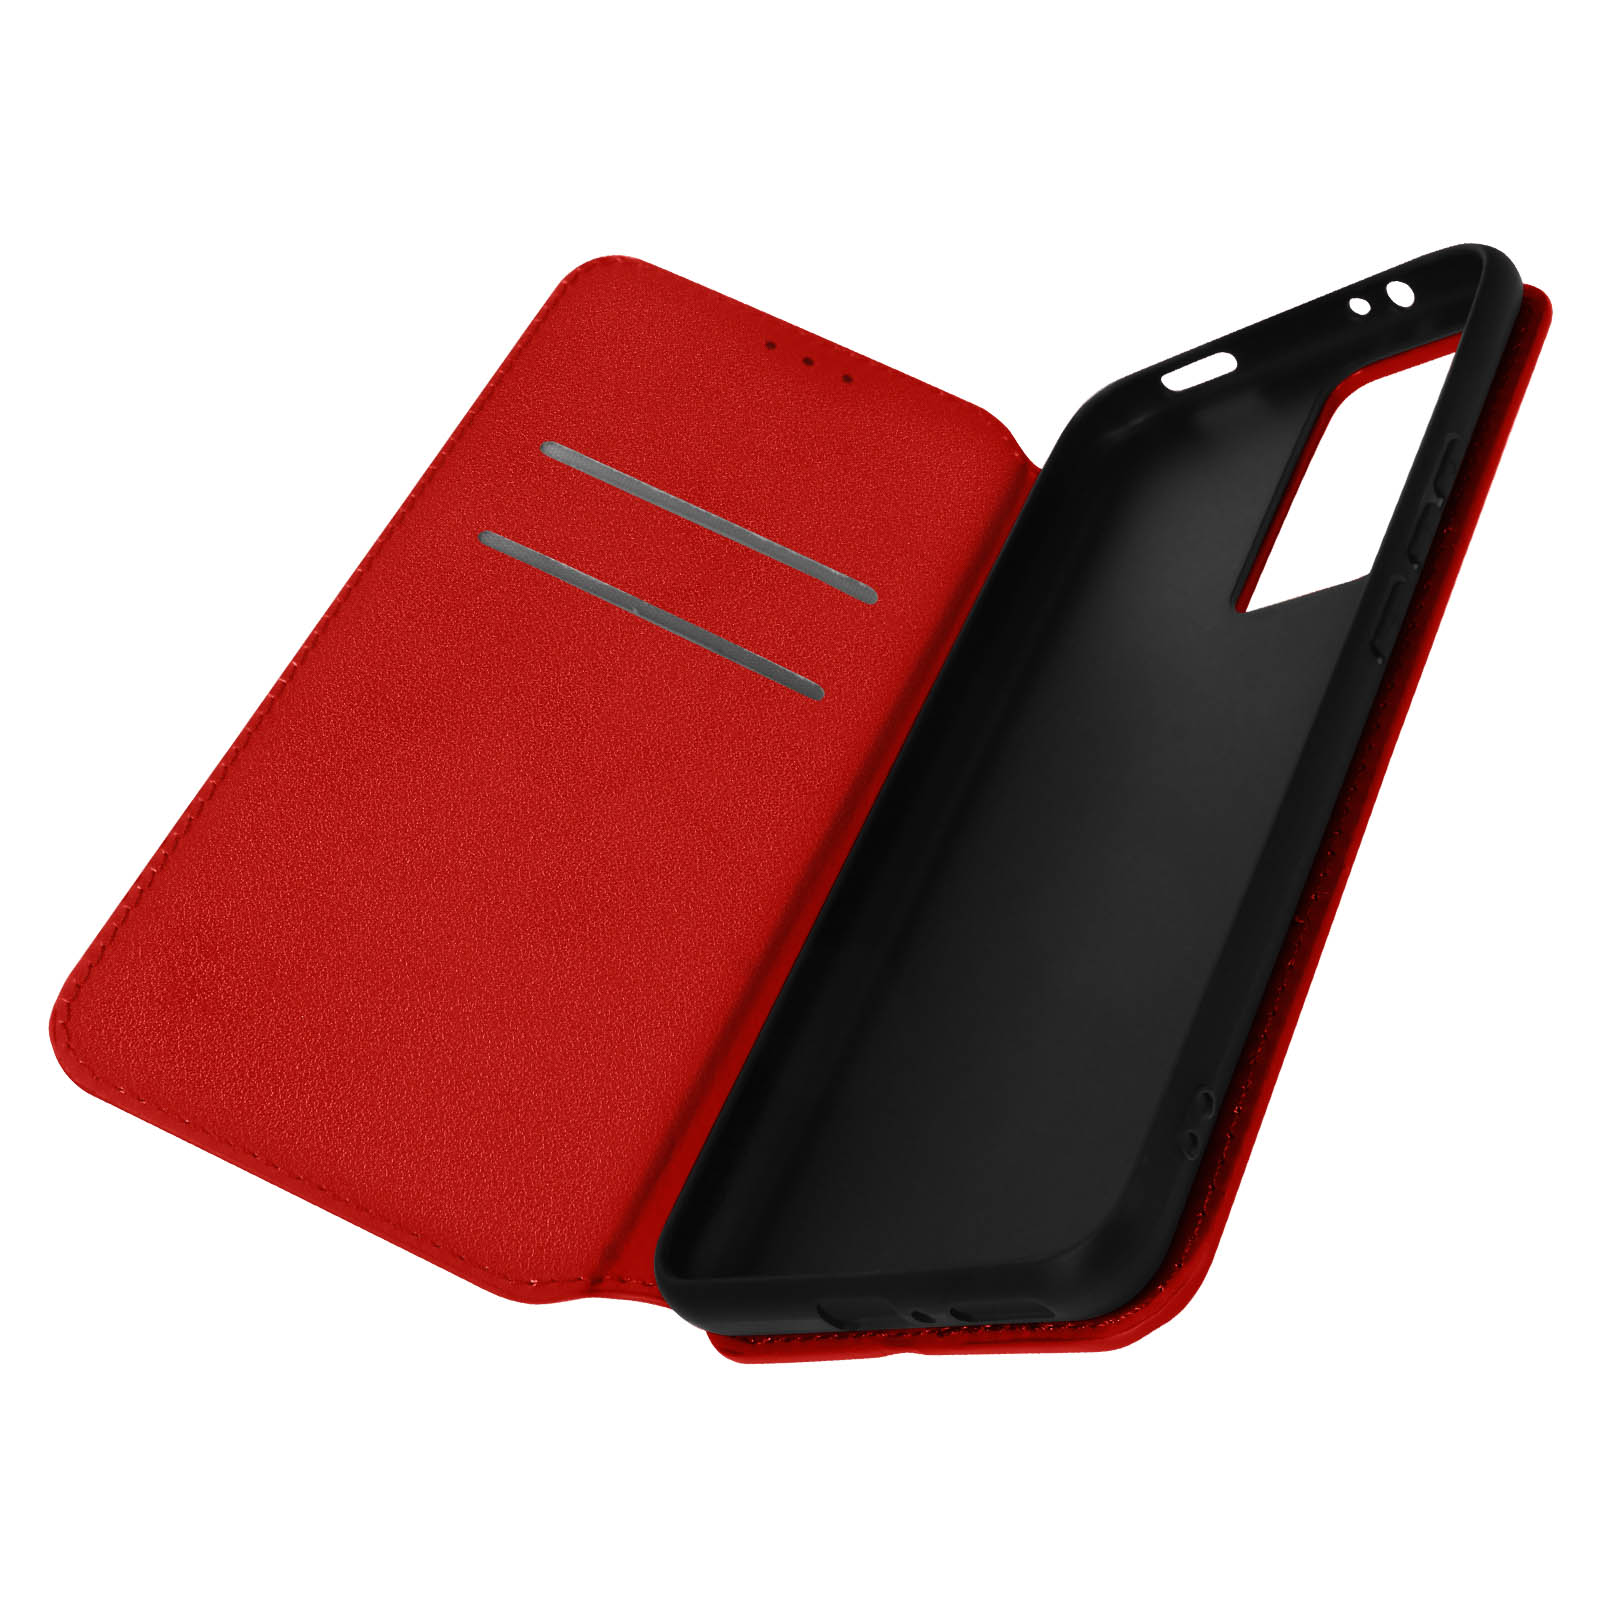 12T Classic Bookcover, mit Edition, Magnetklappe AVIZAR Backcover Pro, Series, Rot Xiaomi,